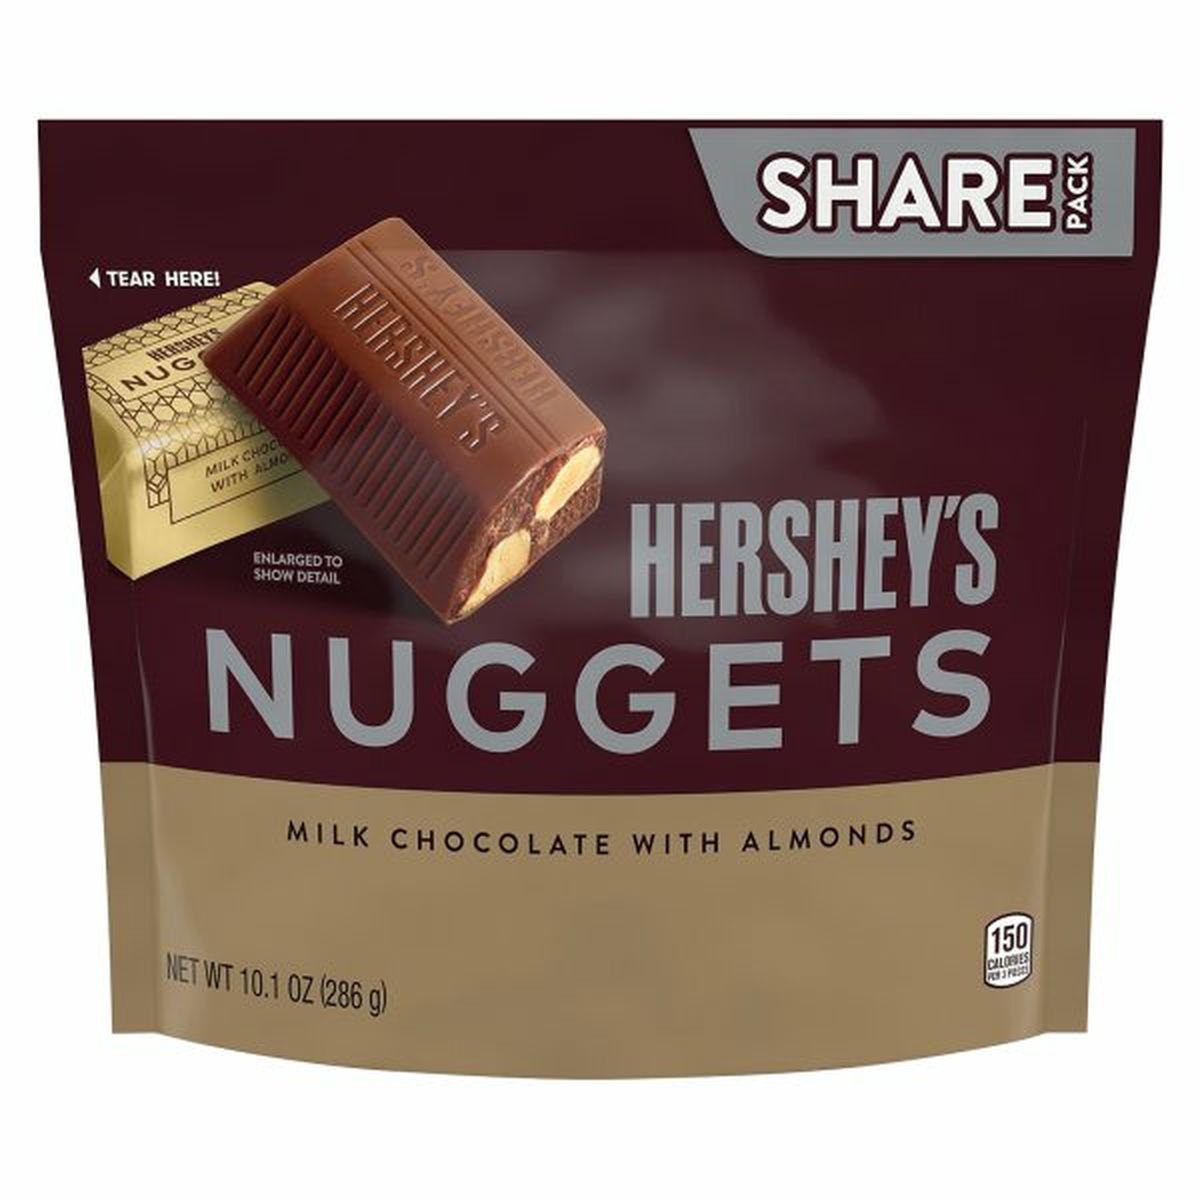 Calories in Hershey's Milk Chocolate With Almonds, Nuggets, Share Pack